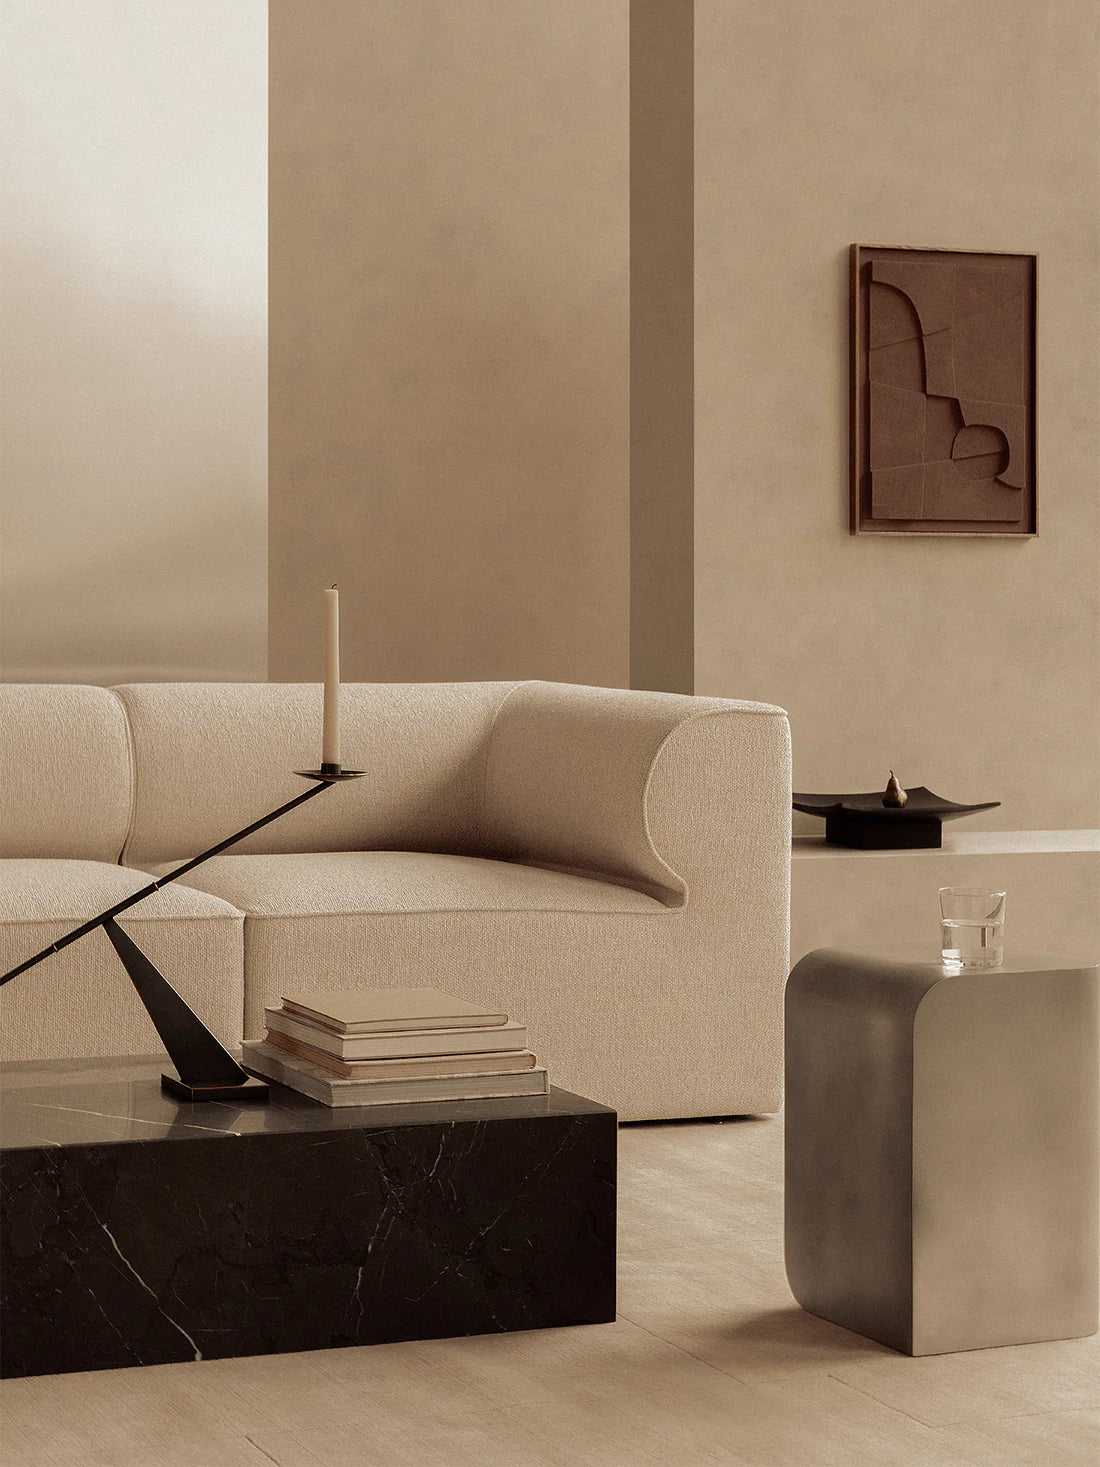 Volume Side Table by Audo Copenhagen in living  room setting with coffeetable and couch.